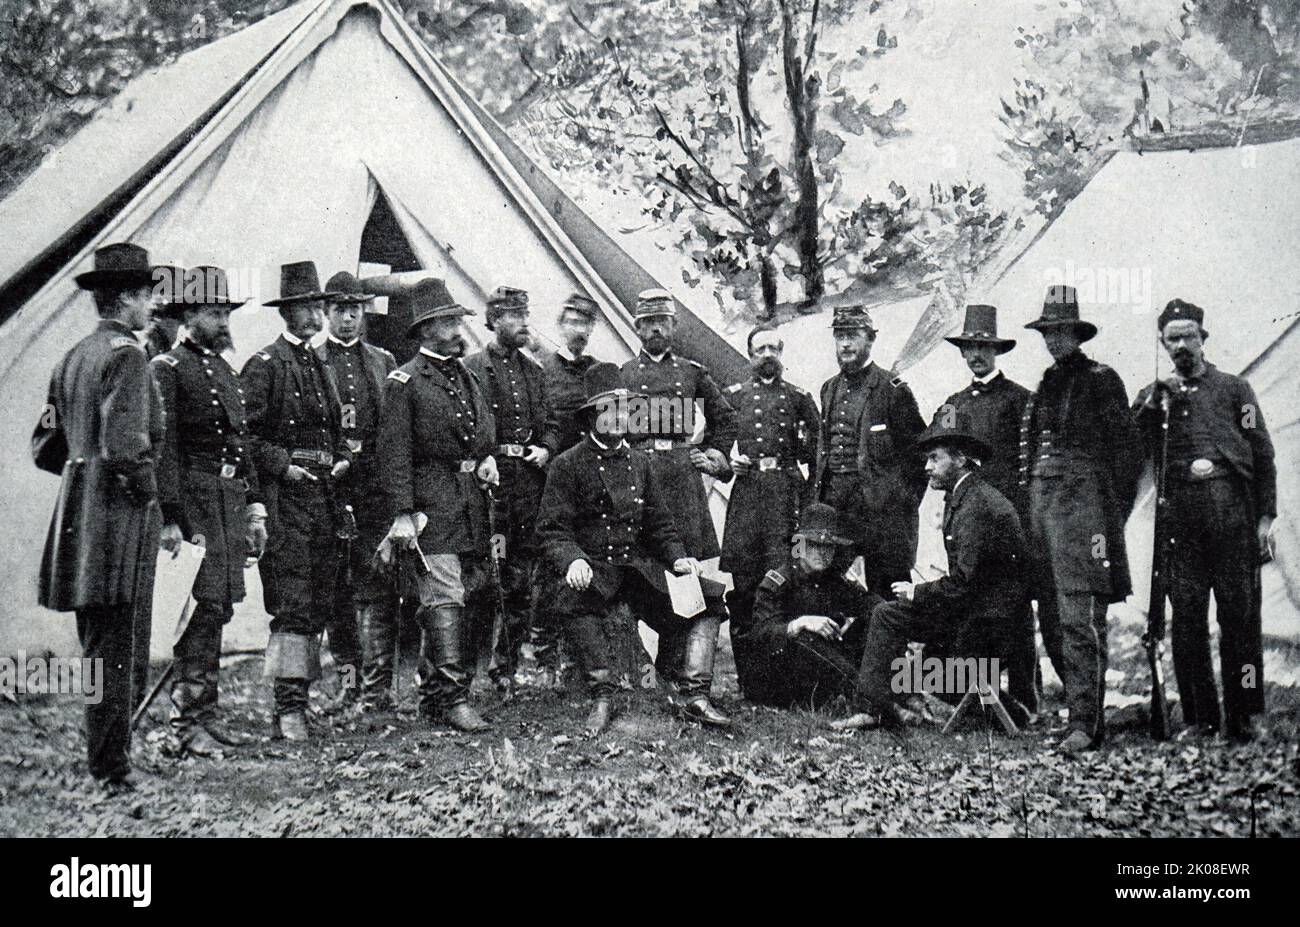 General A. E. Burnside and staff during the American Civil War. Ambrose Everett Burnside (May 23, 1824 - September 13, 1881) was an American army officer and politician who became a senior Union general in the Civil War and three times Governor of Rhode Island, as well as being a successful inventor and industrialist Stock Photo